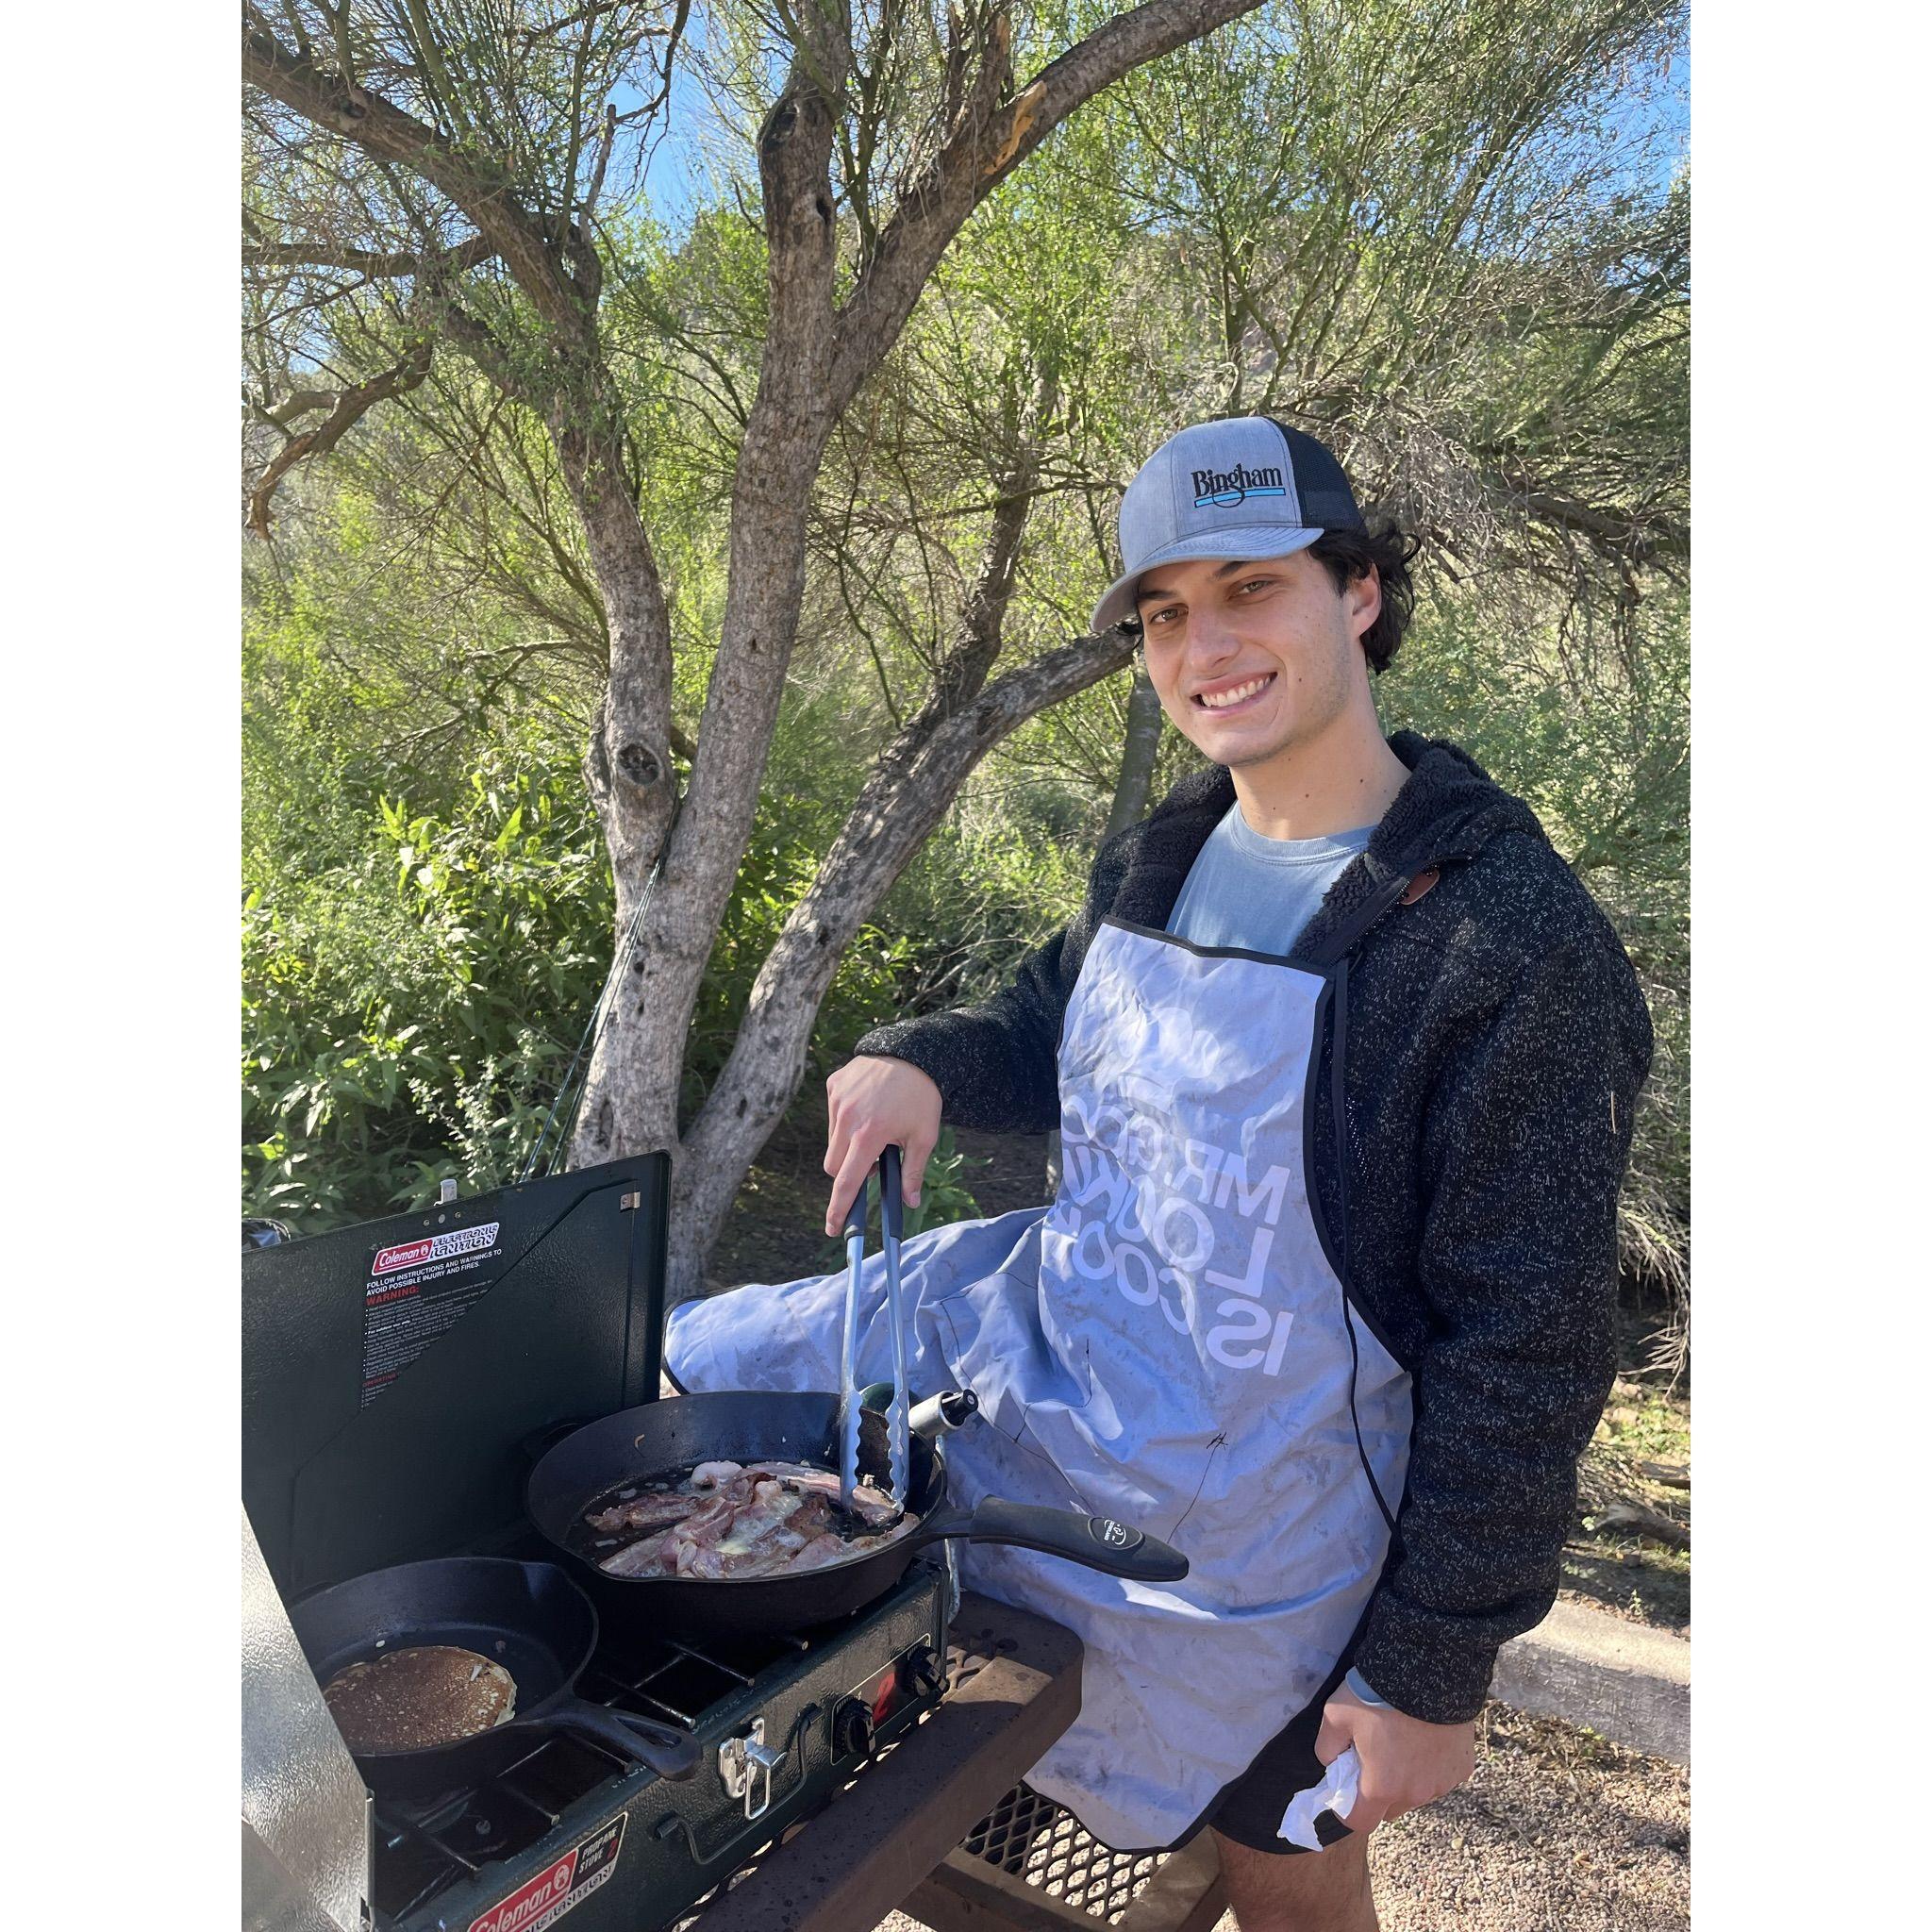 Master chef on the BBQ at our favorite campsite in Phoenix, tortilla flats!